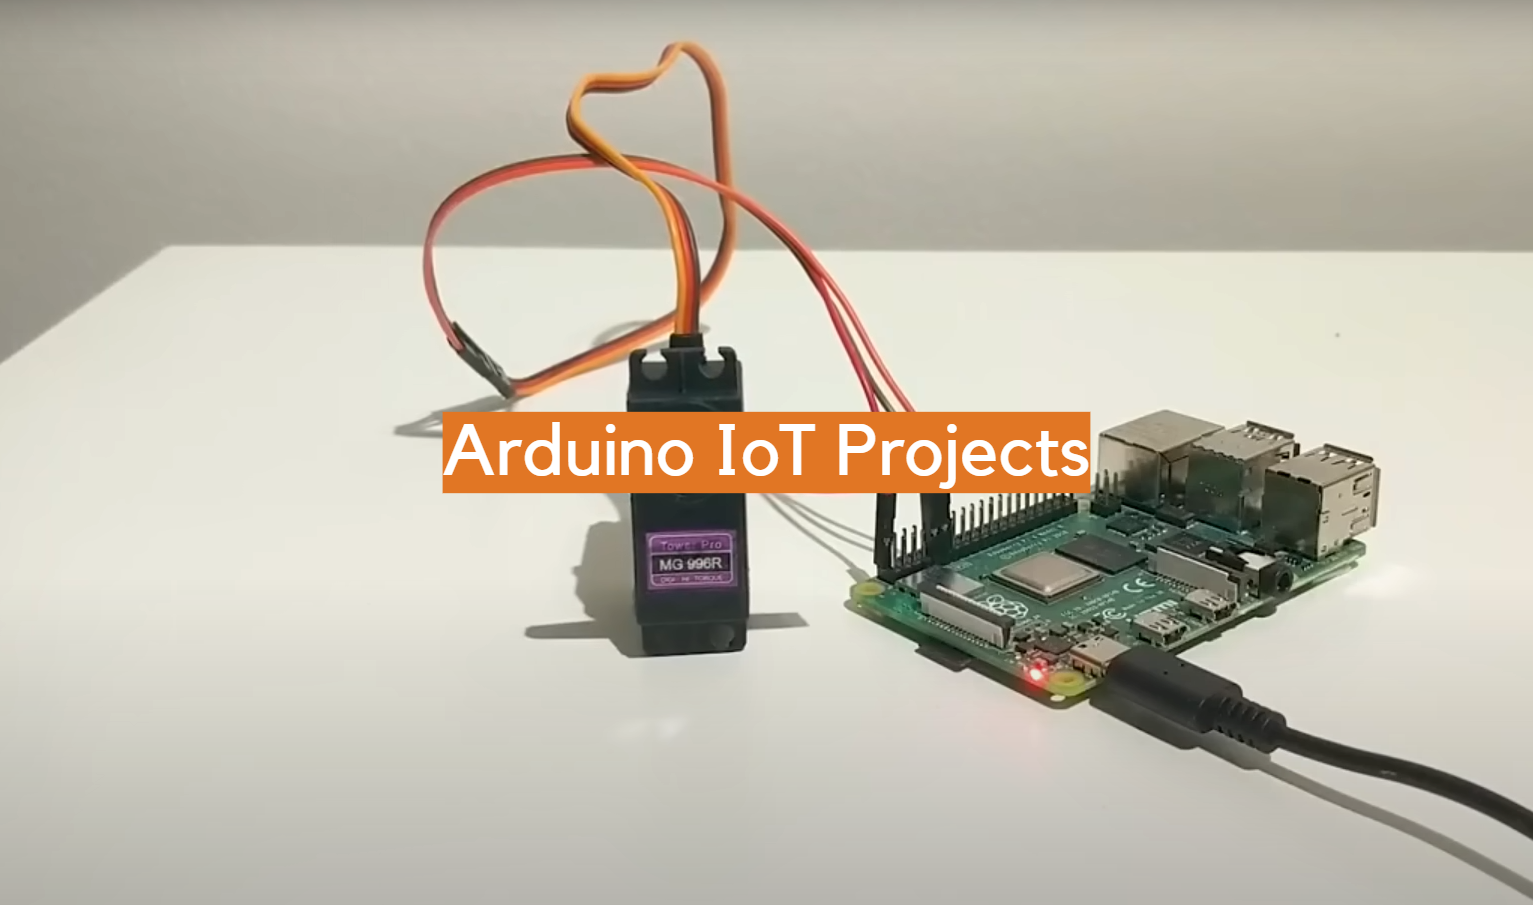 Arduino IoT Projects